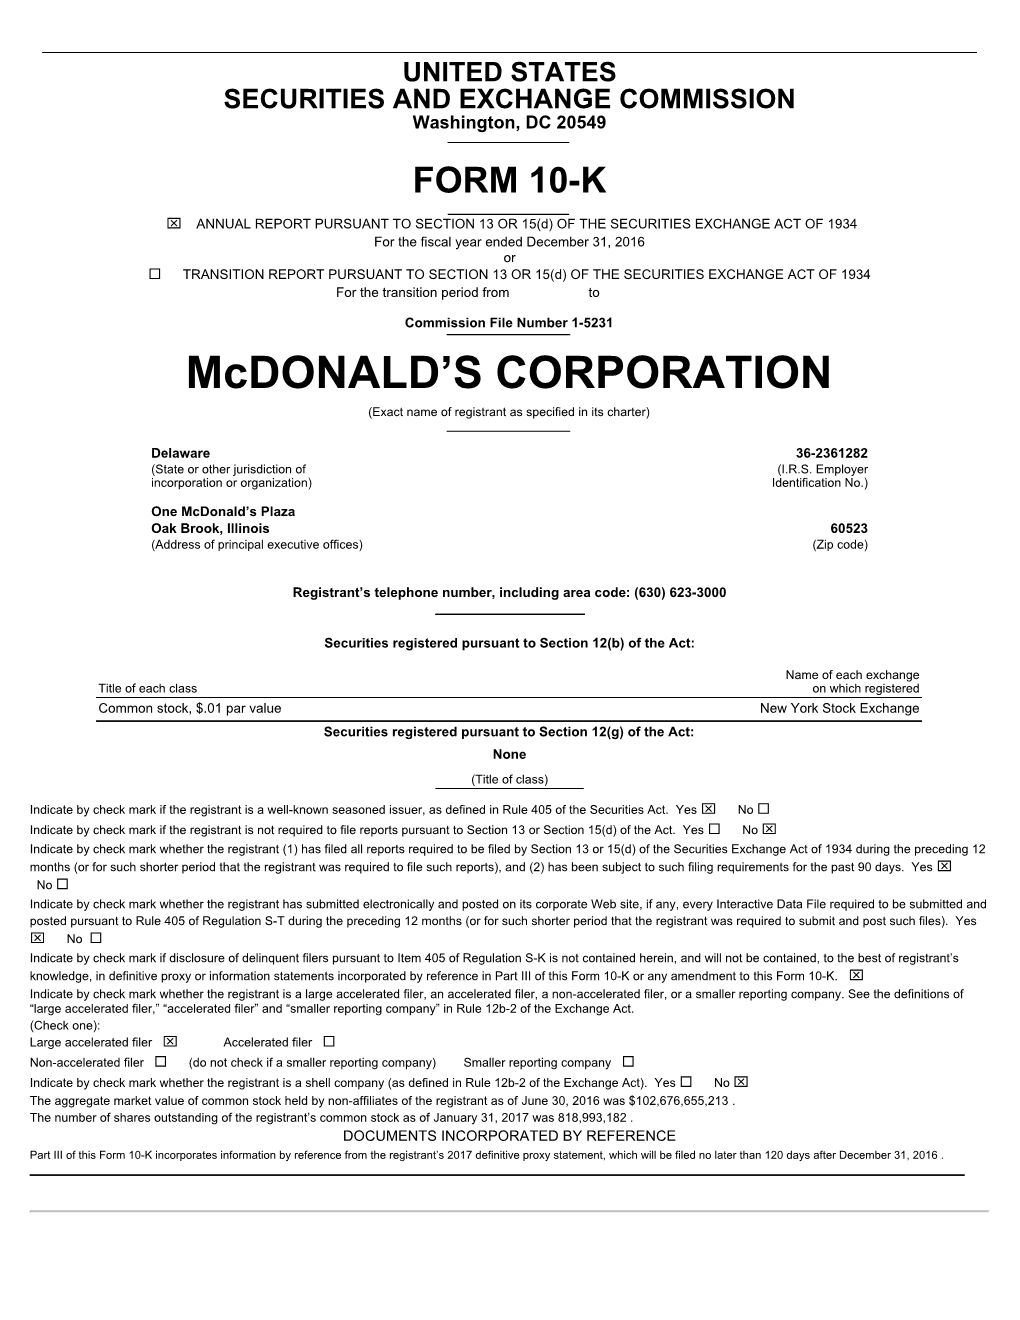 Mcdonald's Corporation 2016 Annual Report 1 Achieving Competitive, Predictable Food and Paper Costs Over the Long Term